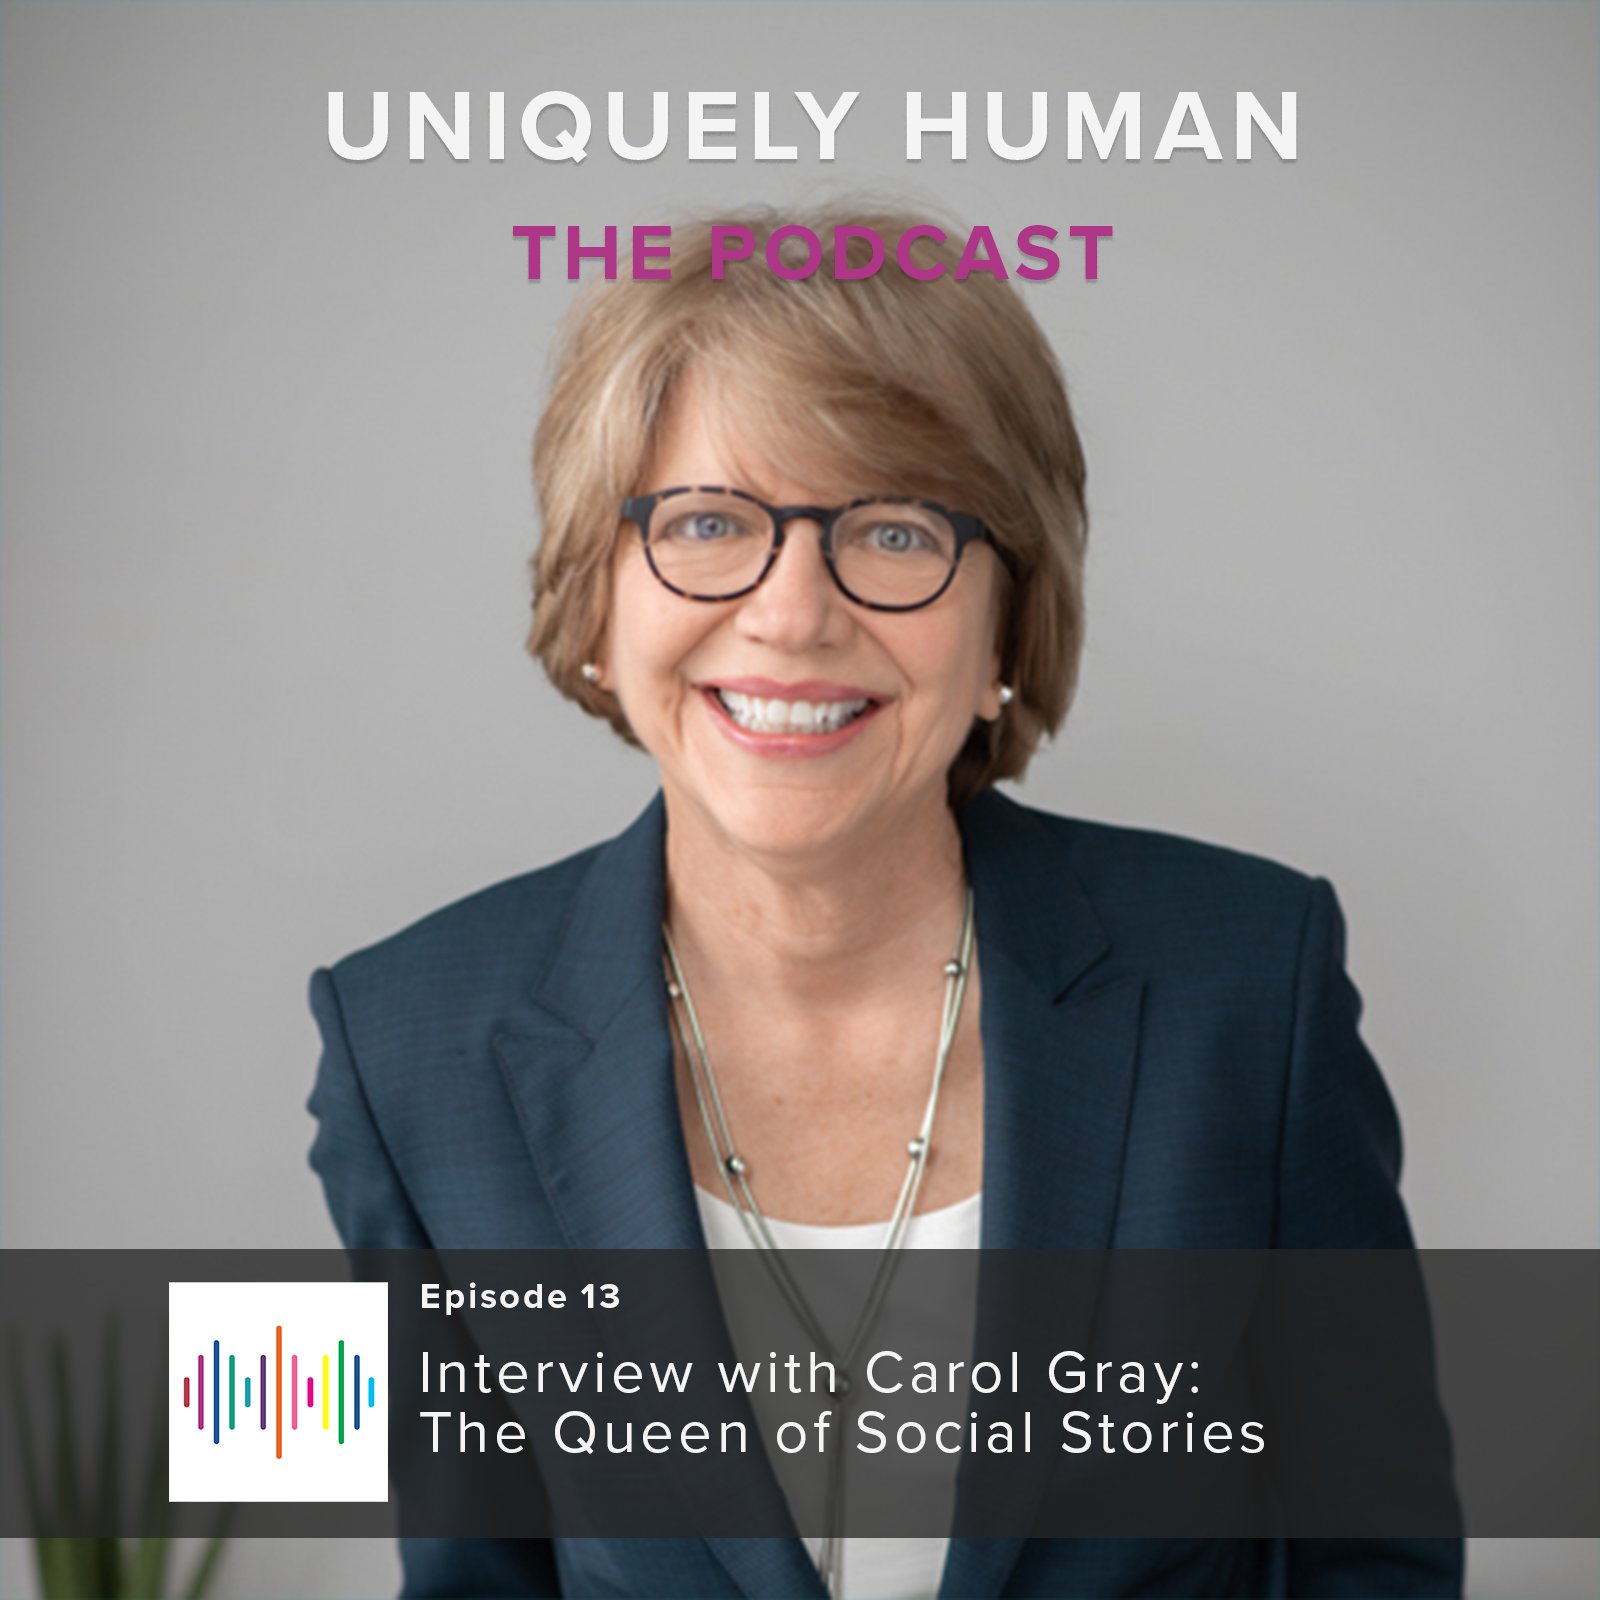 interview-with-carol-gray-the-queen-of-social-stories-uniquely-human-the-podcast